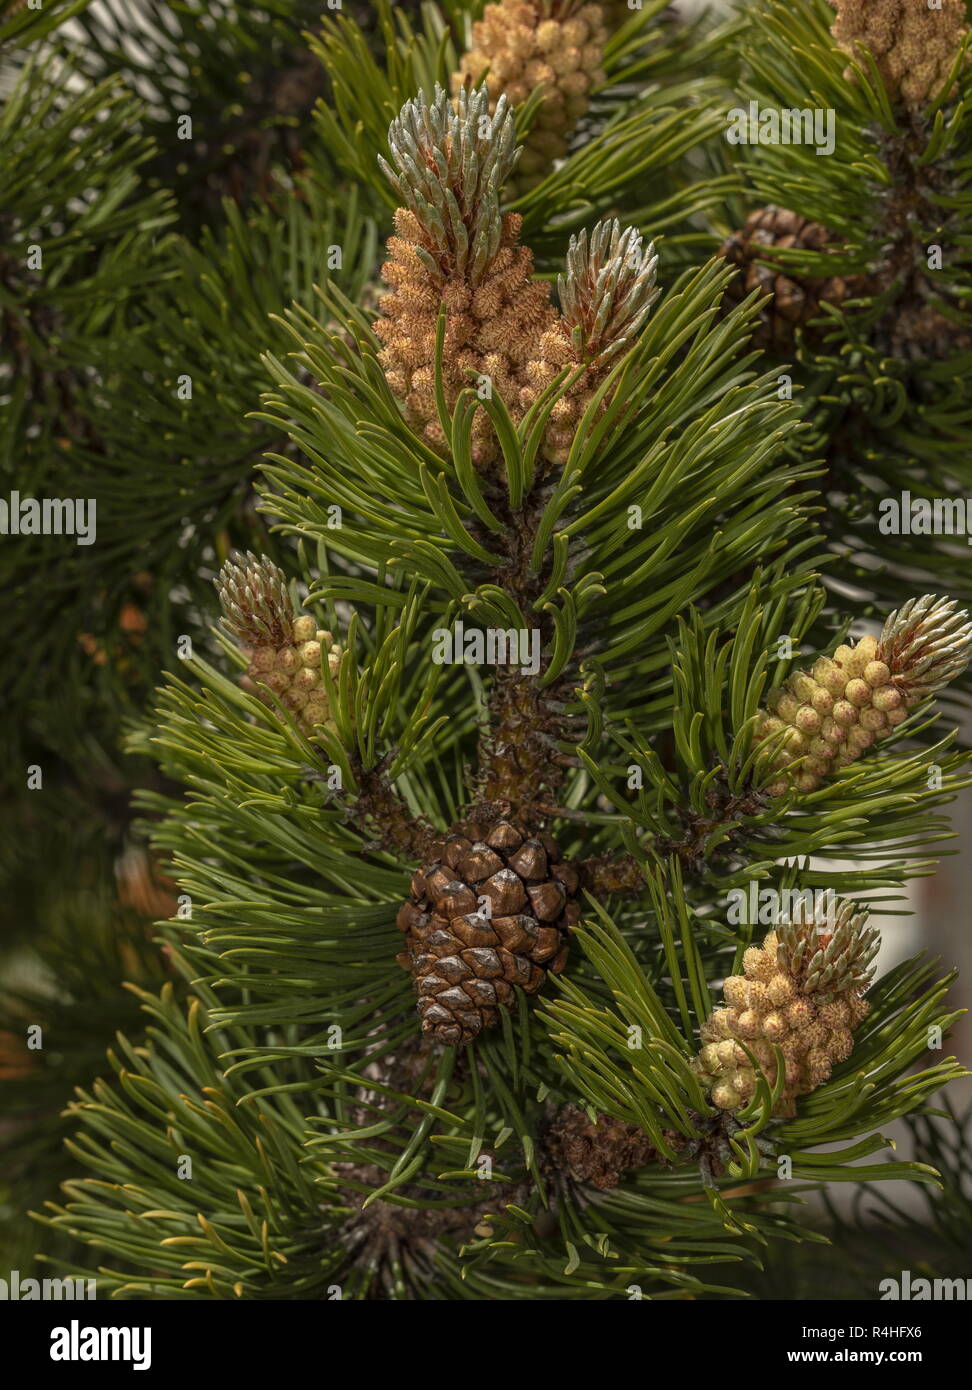 Dwarf mountain pine, Pinus mugo, with male flowers, female cones and needles, french Alps. Stock Photo